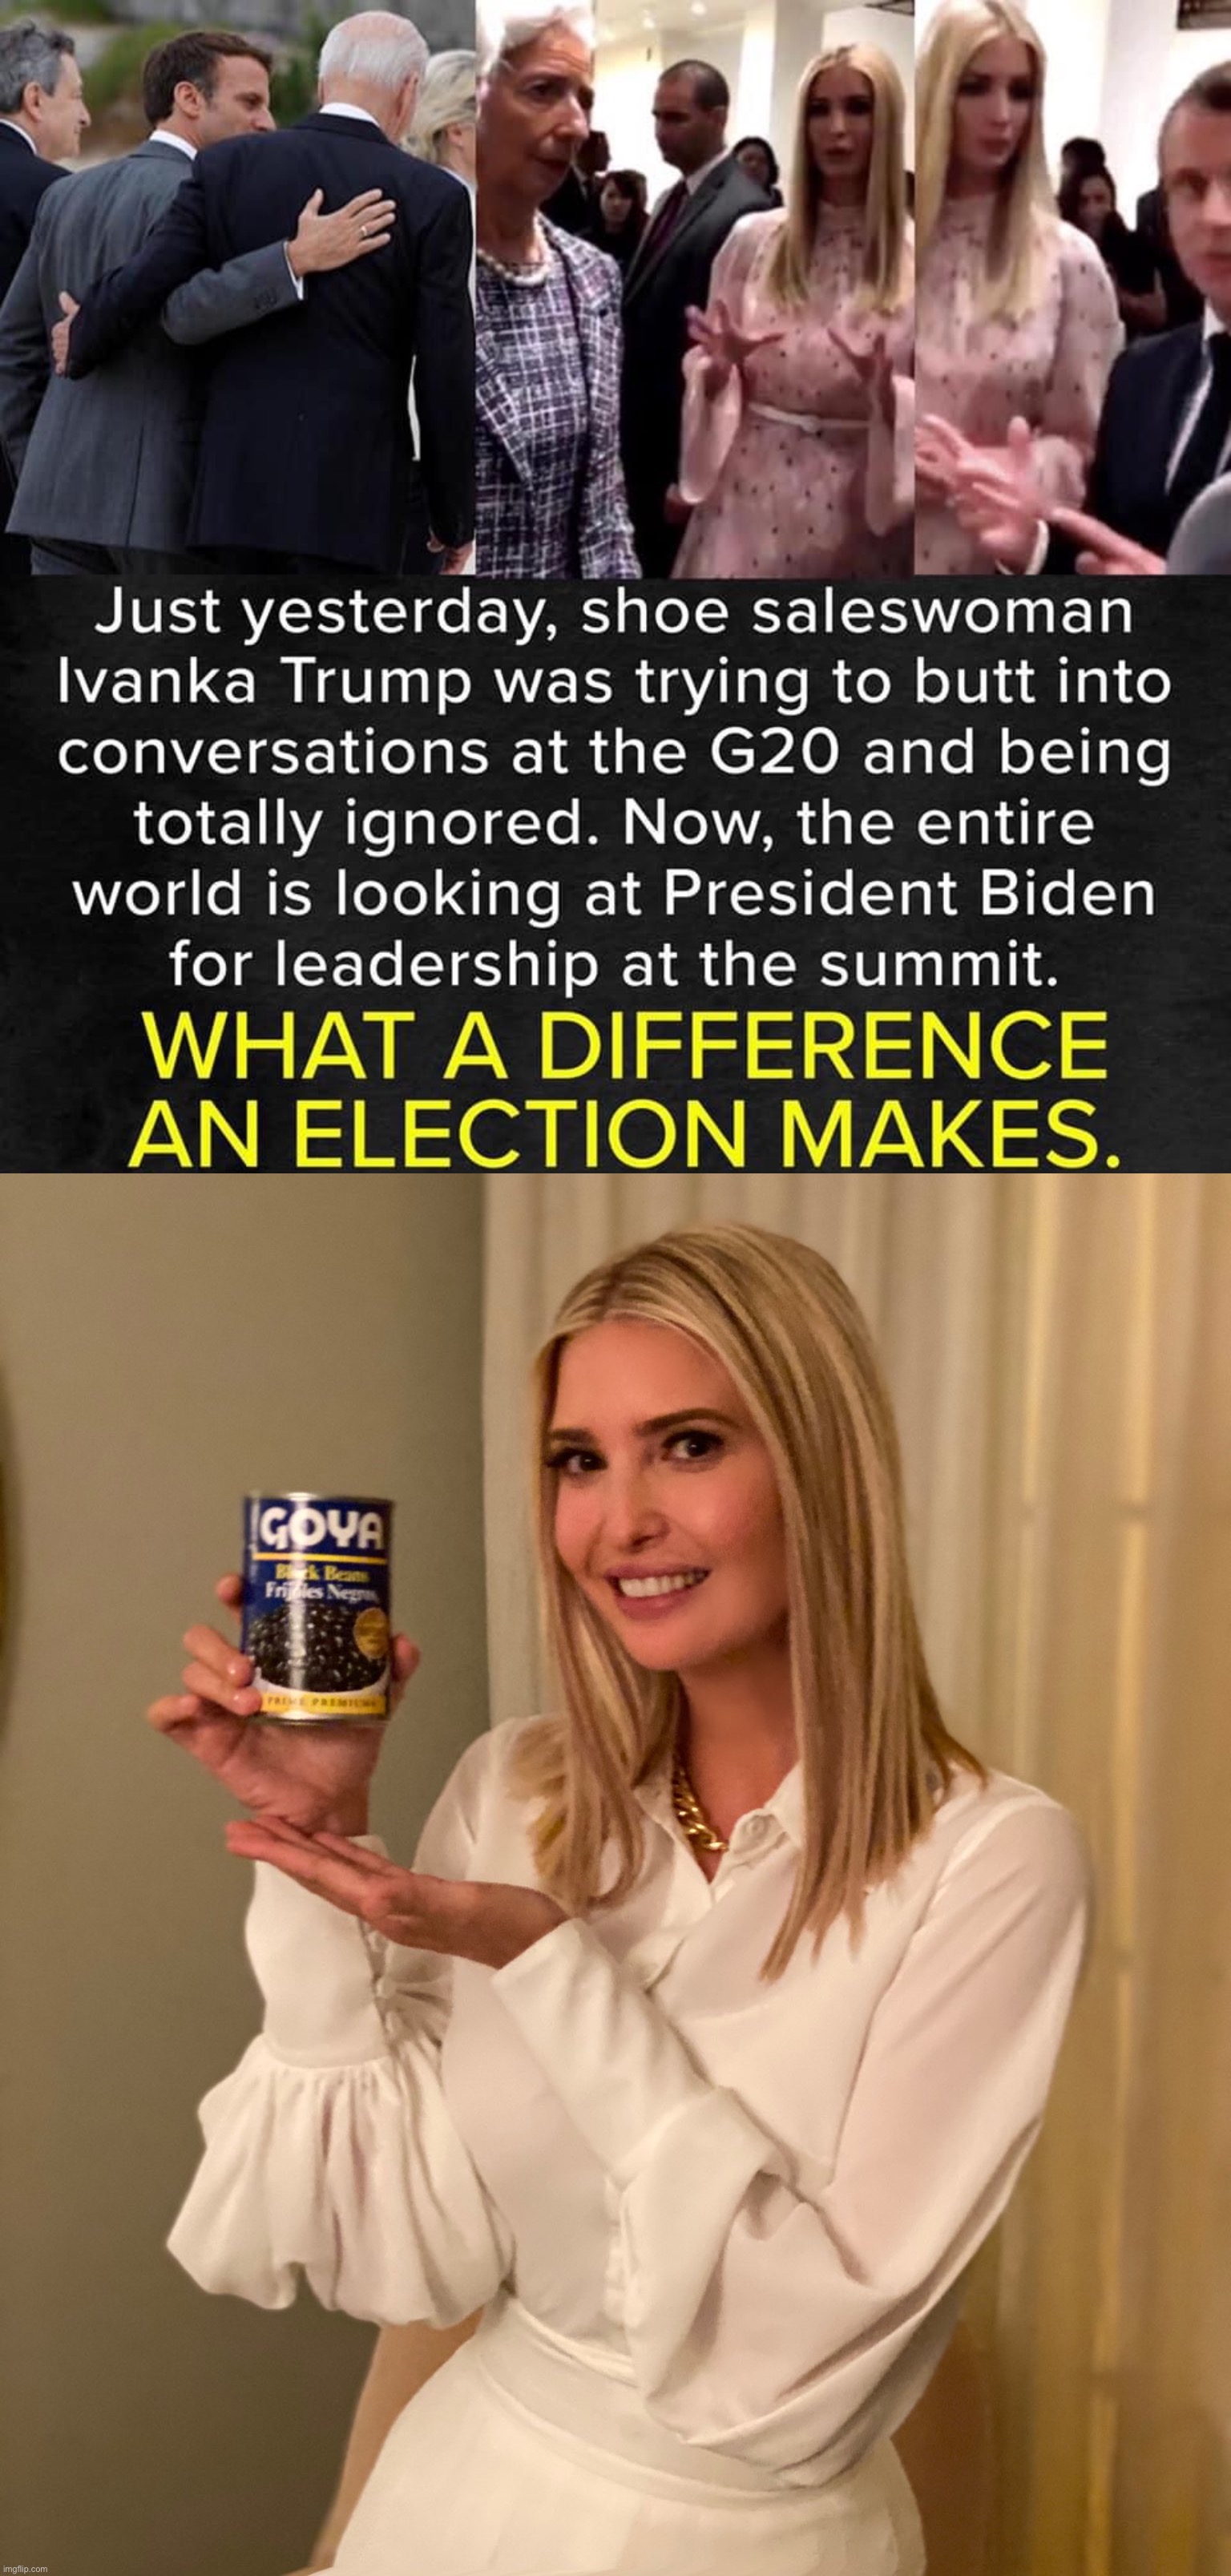 Ivanka was RUDELY MISTREATED at G-20!! Prove the globalists wrong by BUYING GOYA!!! #MAGA #CancelCulture #LiberalTears #BuyGoya | image tagged in ivanka trump at g-20,ivanka trump con goya,liberal tears,ivanka trump,ivanka,hypocrisy | made w/ Imgflip meme maker